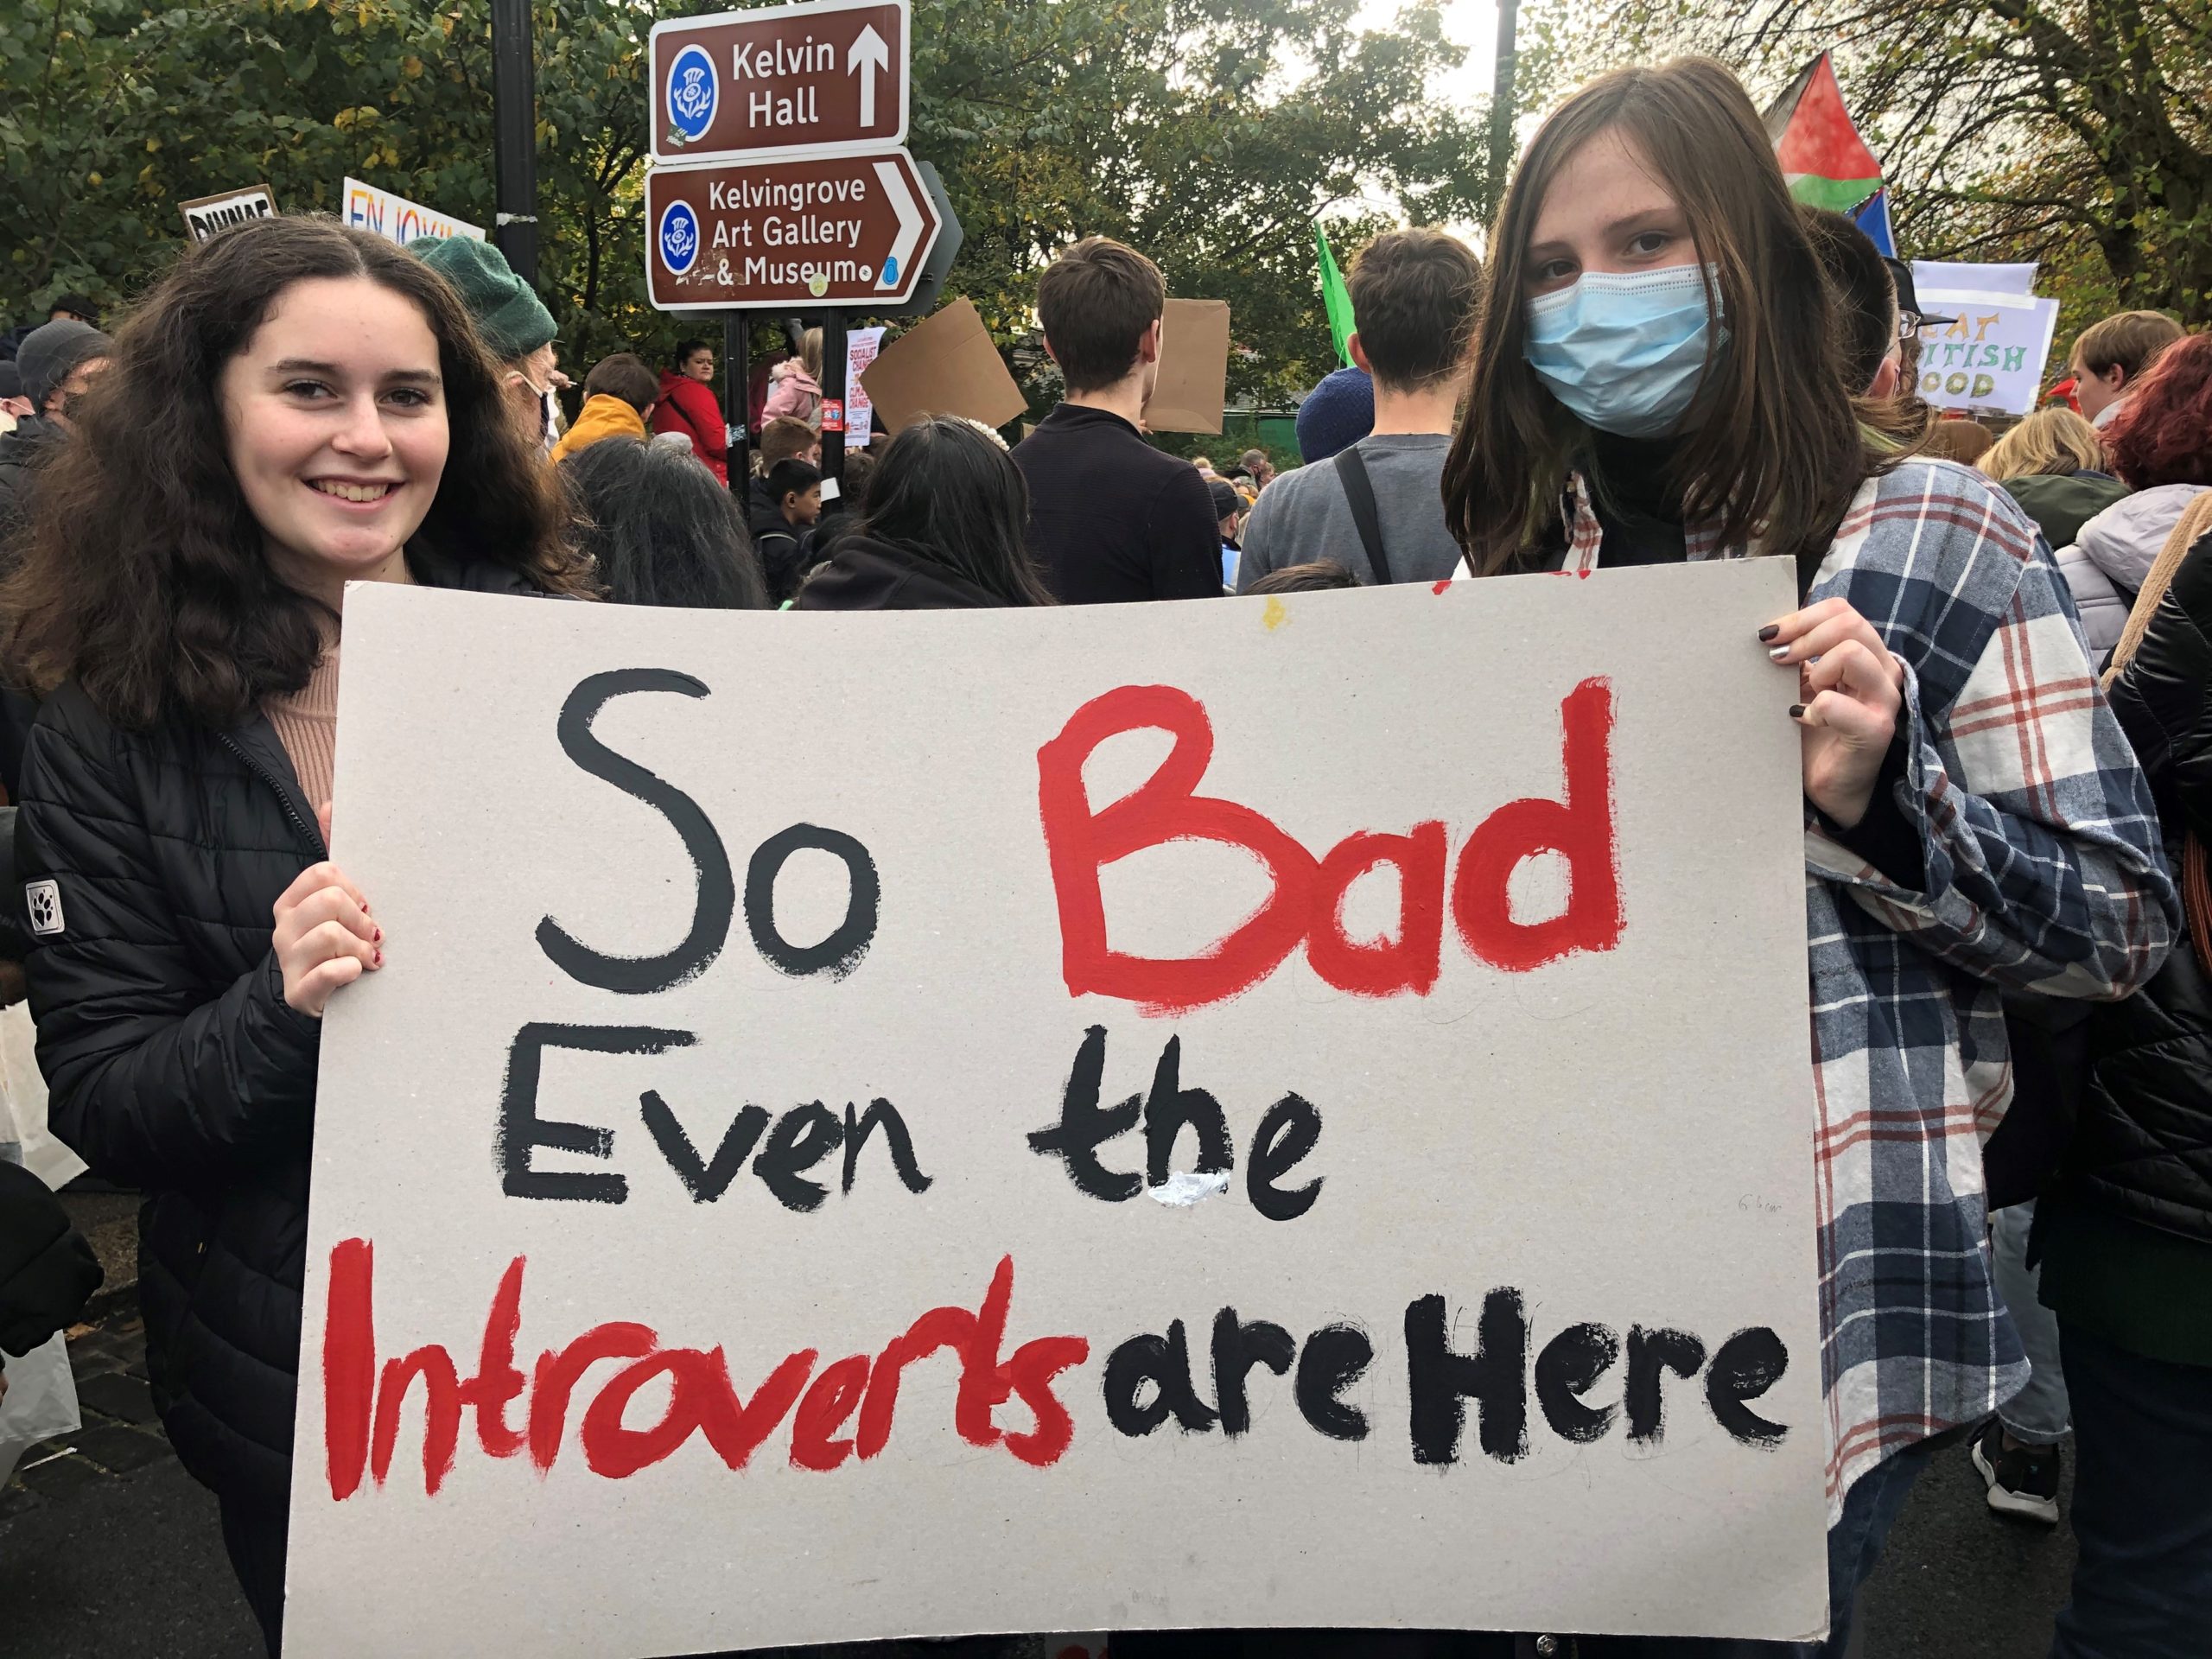 Two activists in Glasgow say things are "so bad even the introverts are here". Image: Sarah Wilson